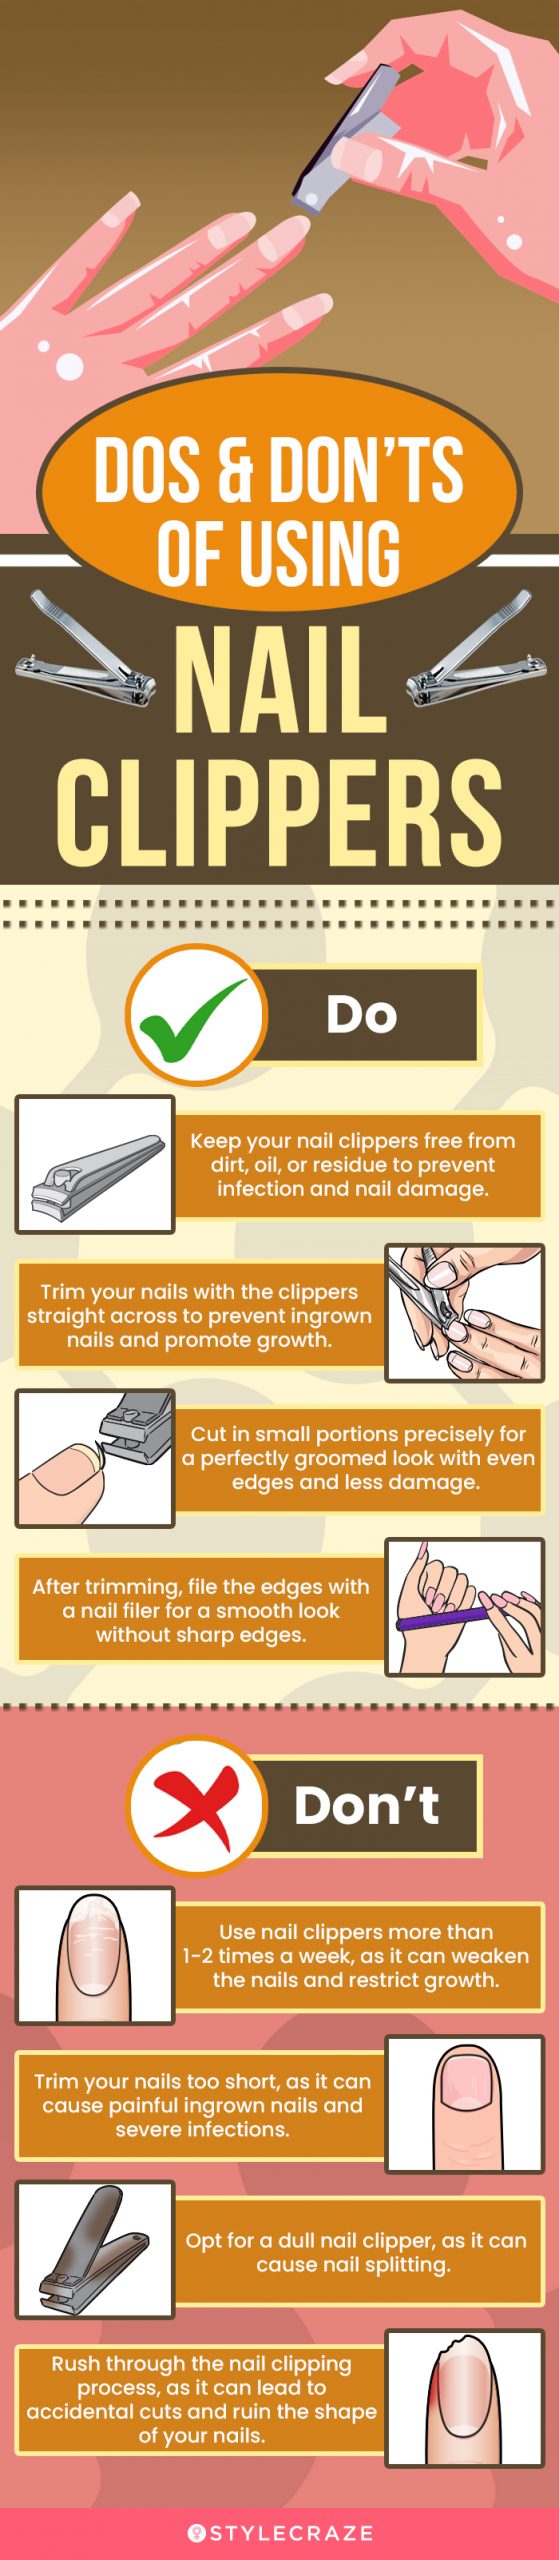 Dos & Don’ts Of Using Nail Clippers(infographic)